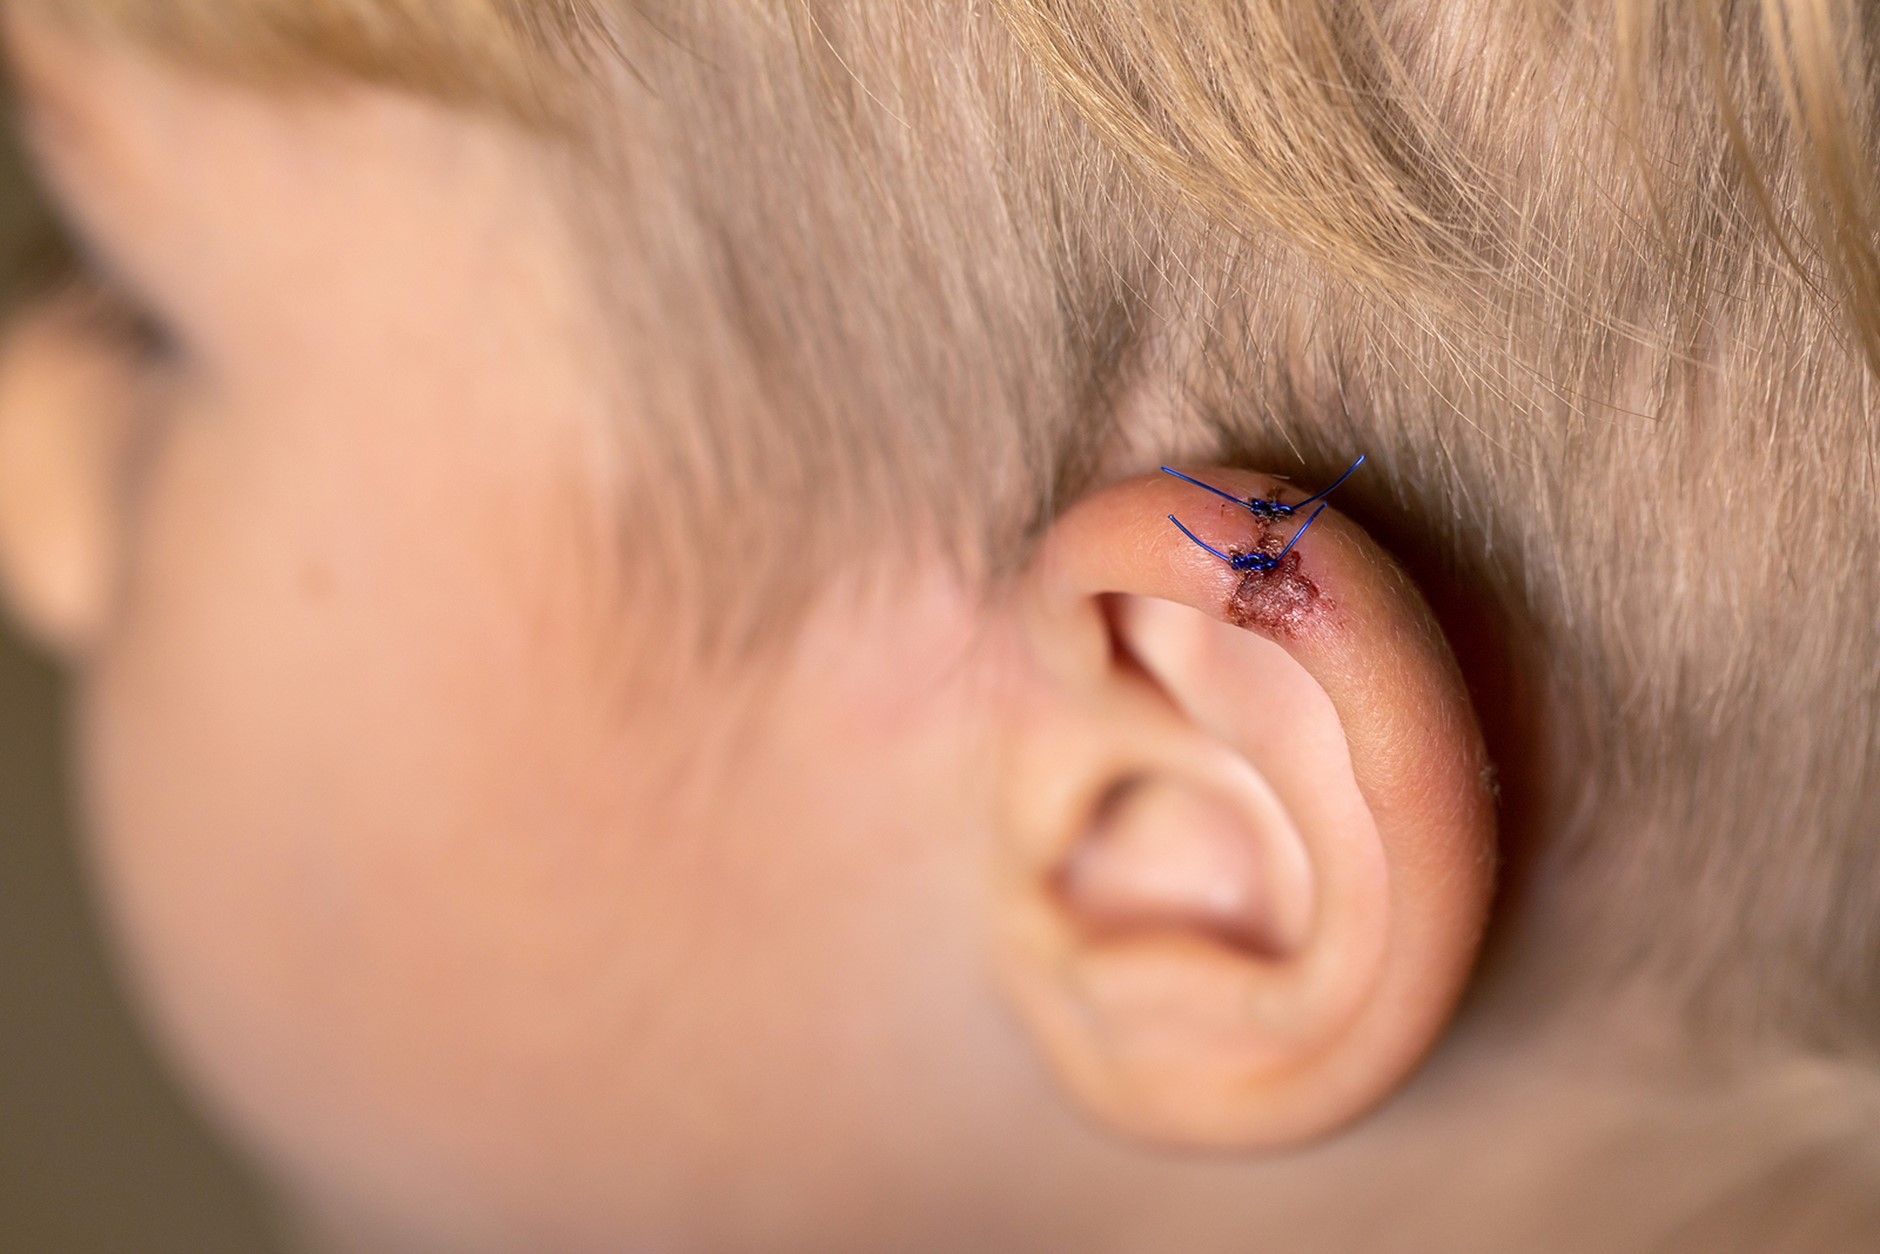 Does My Child Need Stitches?